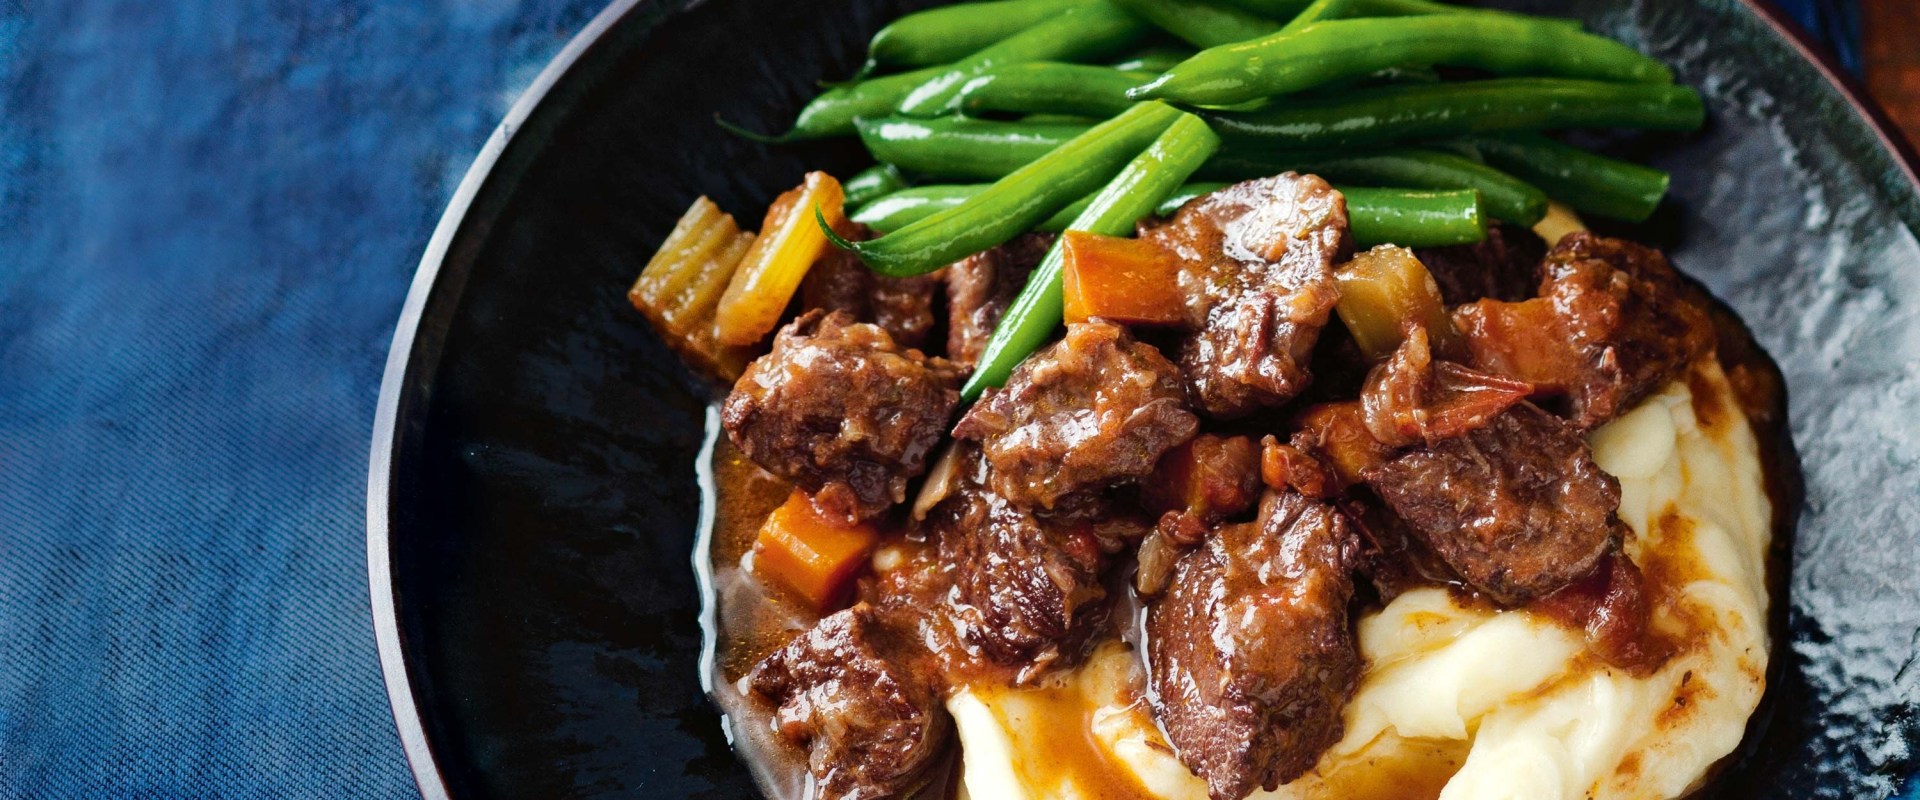 Cook Delicious Meals with a Slow Cooker